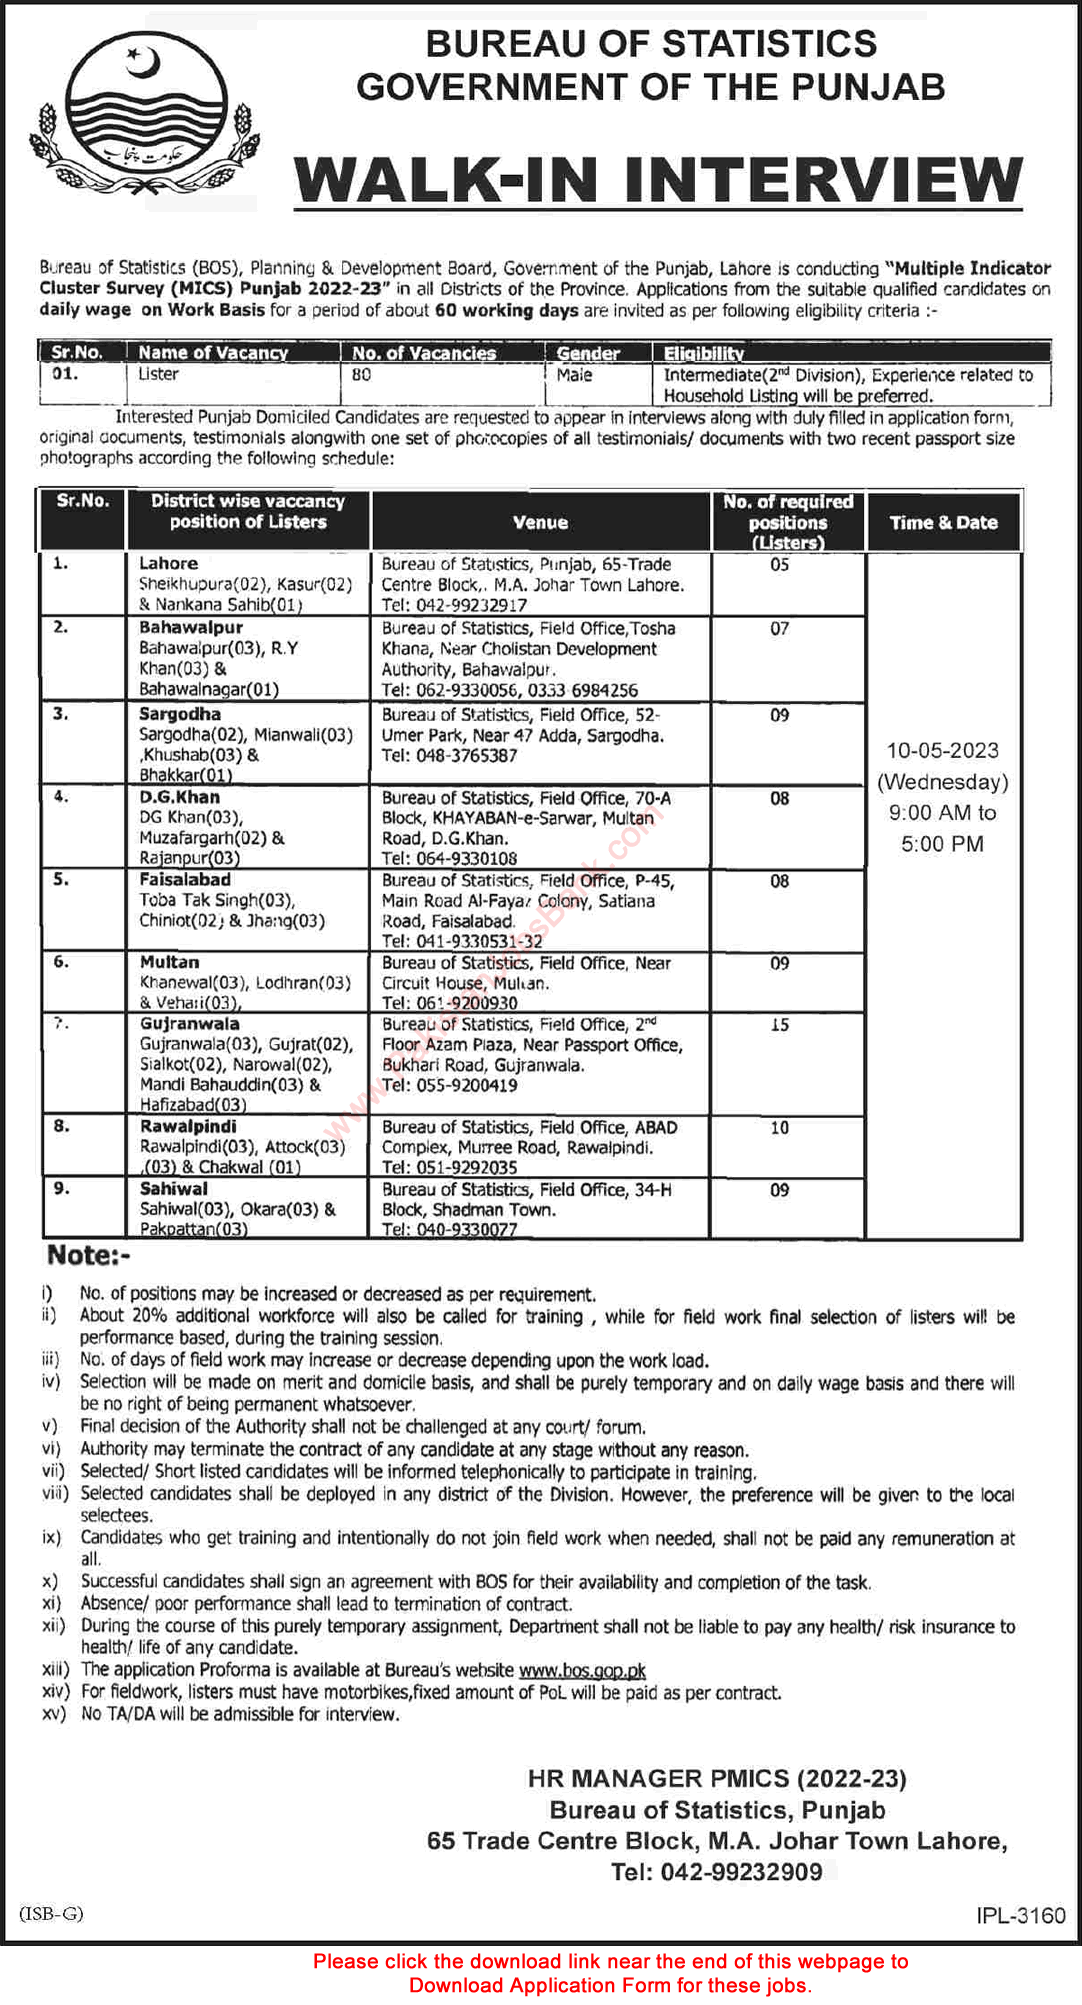 Lister Jobs in Punjab Bureau of Statistics 2023 May Application Form Walk In Interview Latest